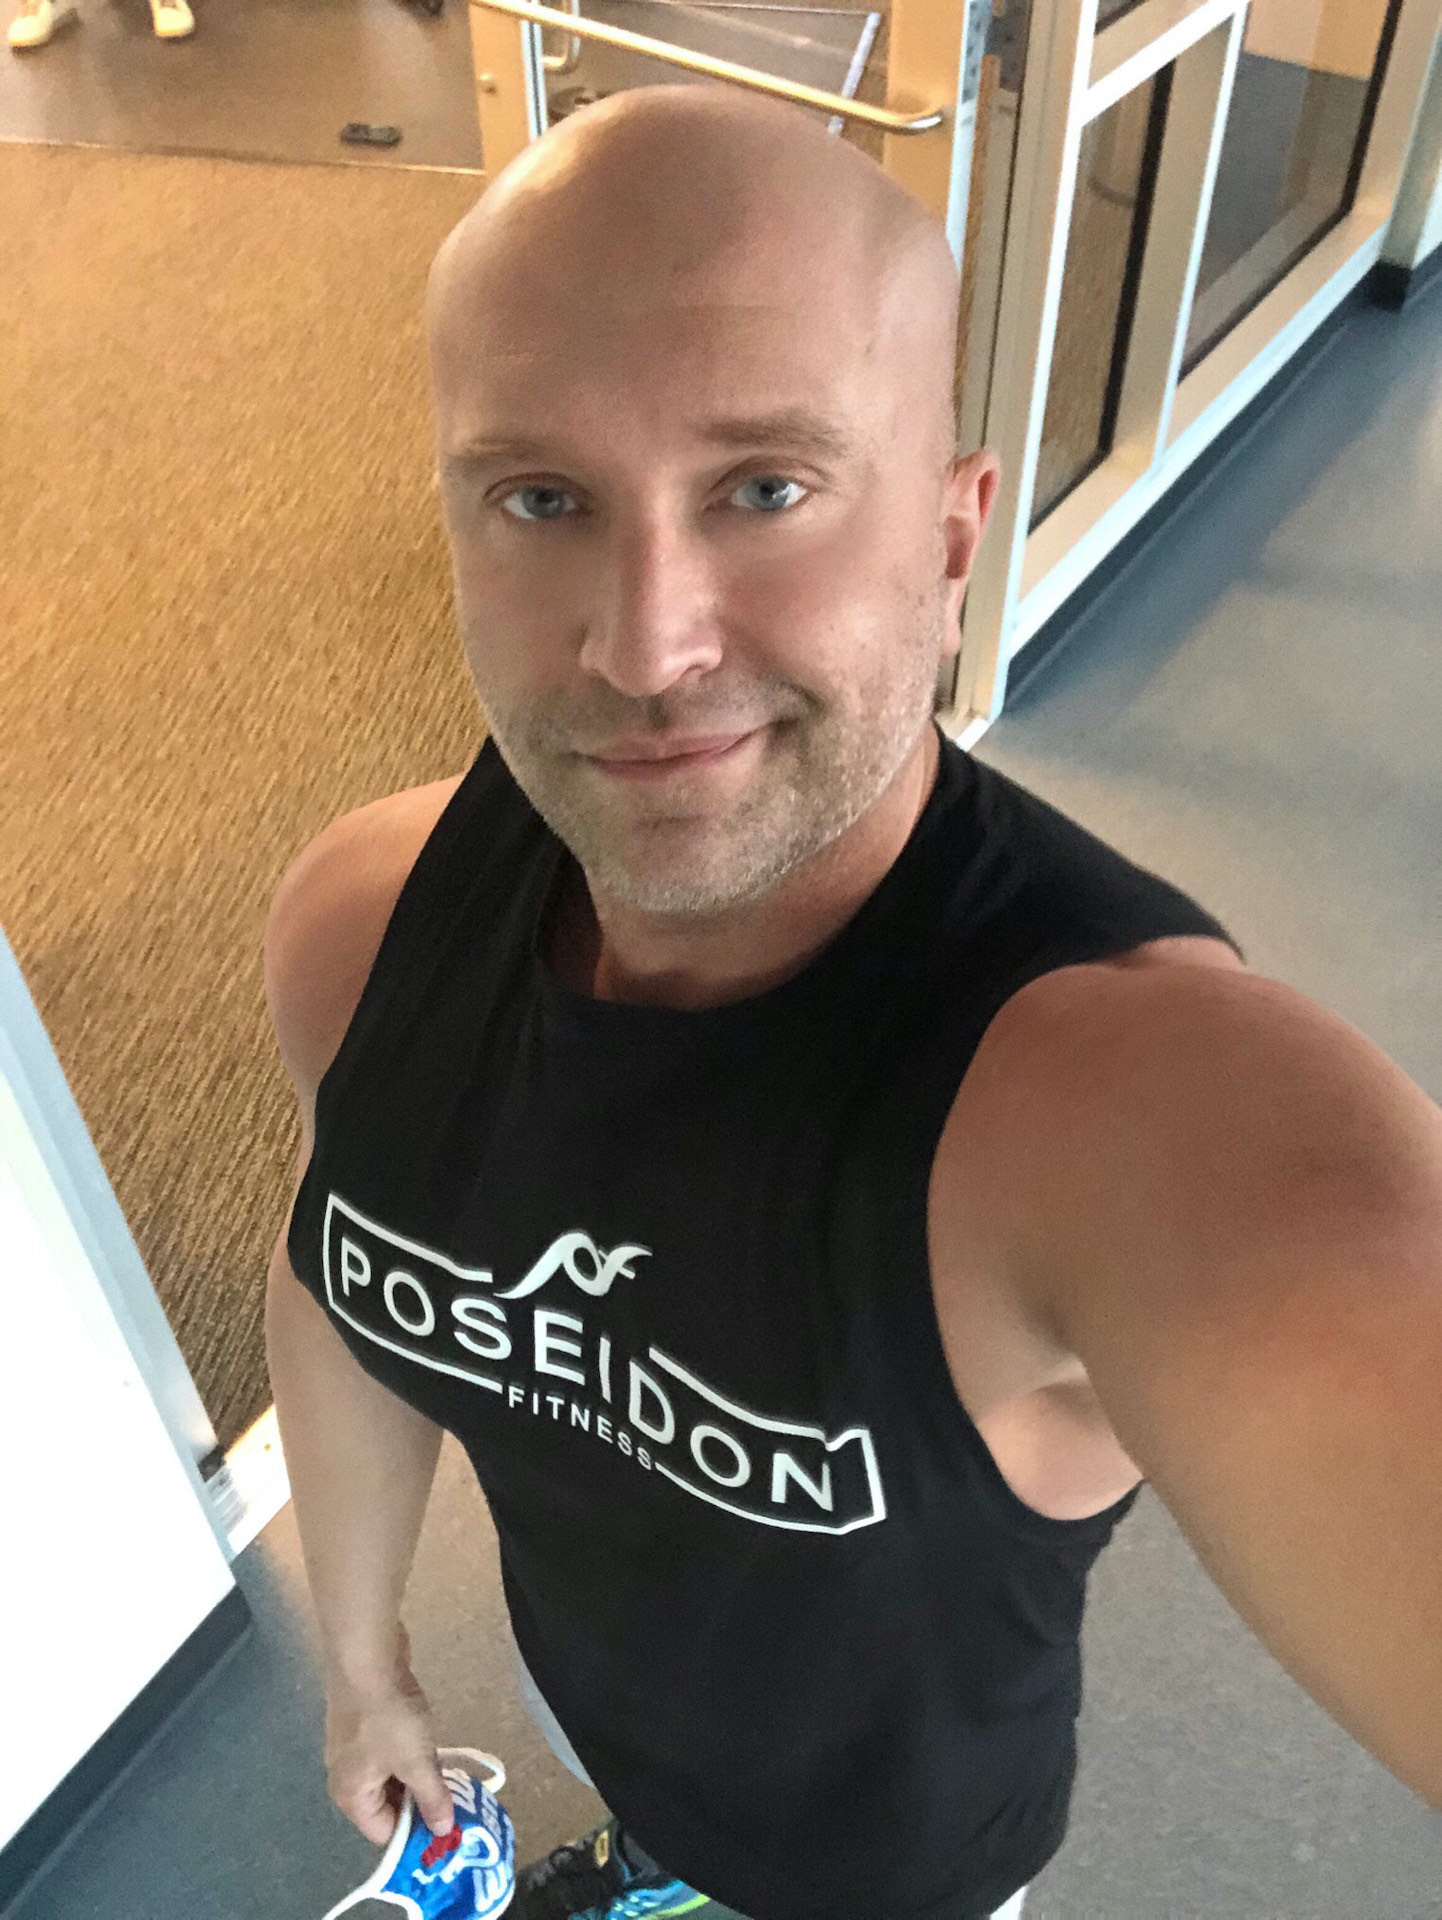 Workout with Poseidon Fitness and their sexy gear…